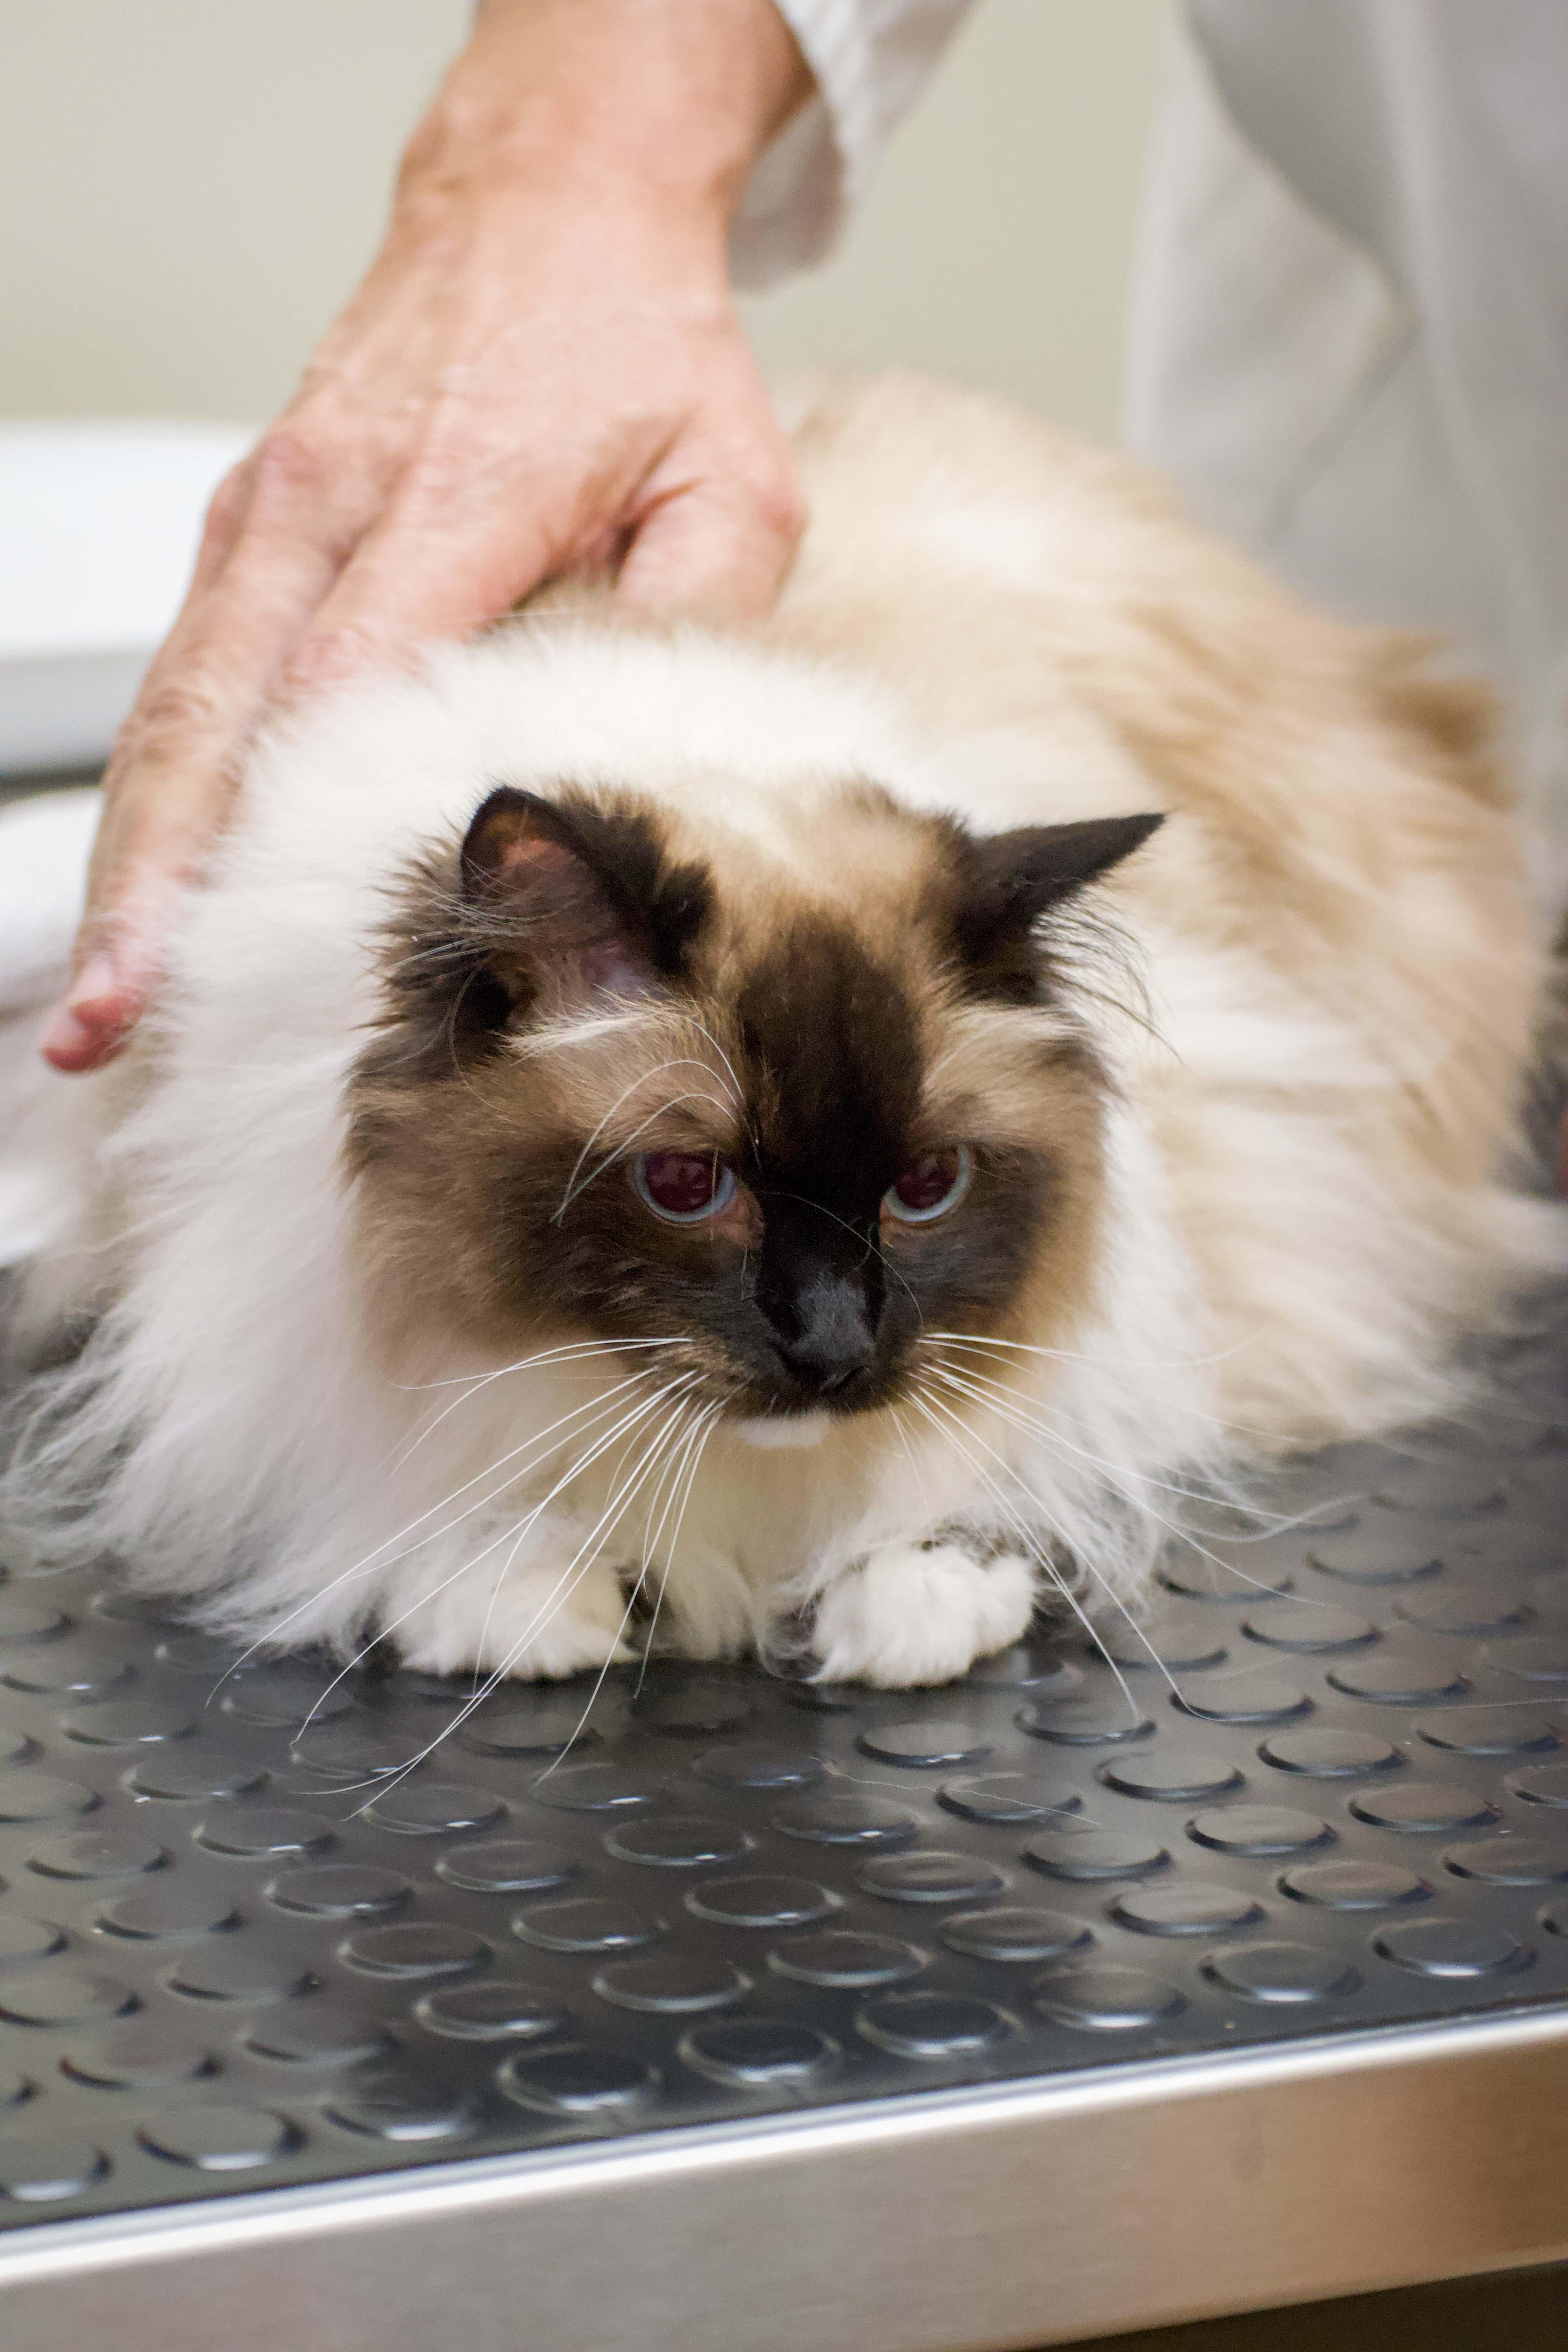 Our entire team is trained to hold our patients for exams so that pets feel as safe and comfortable as possible.